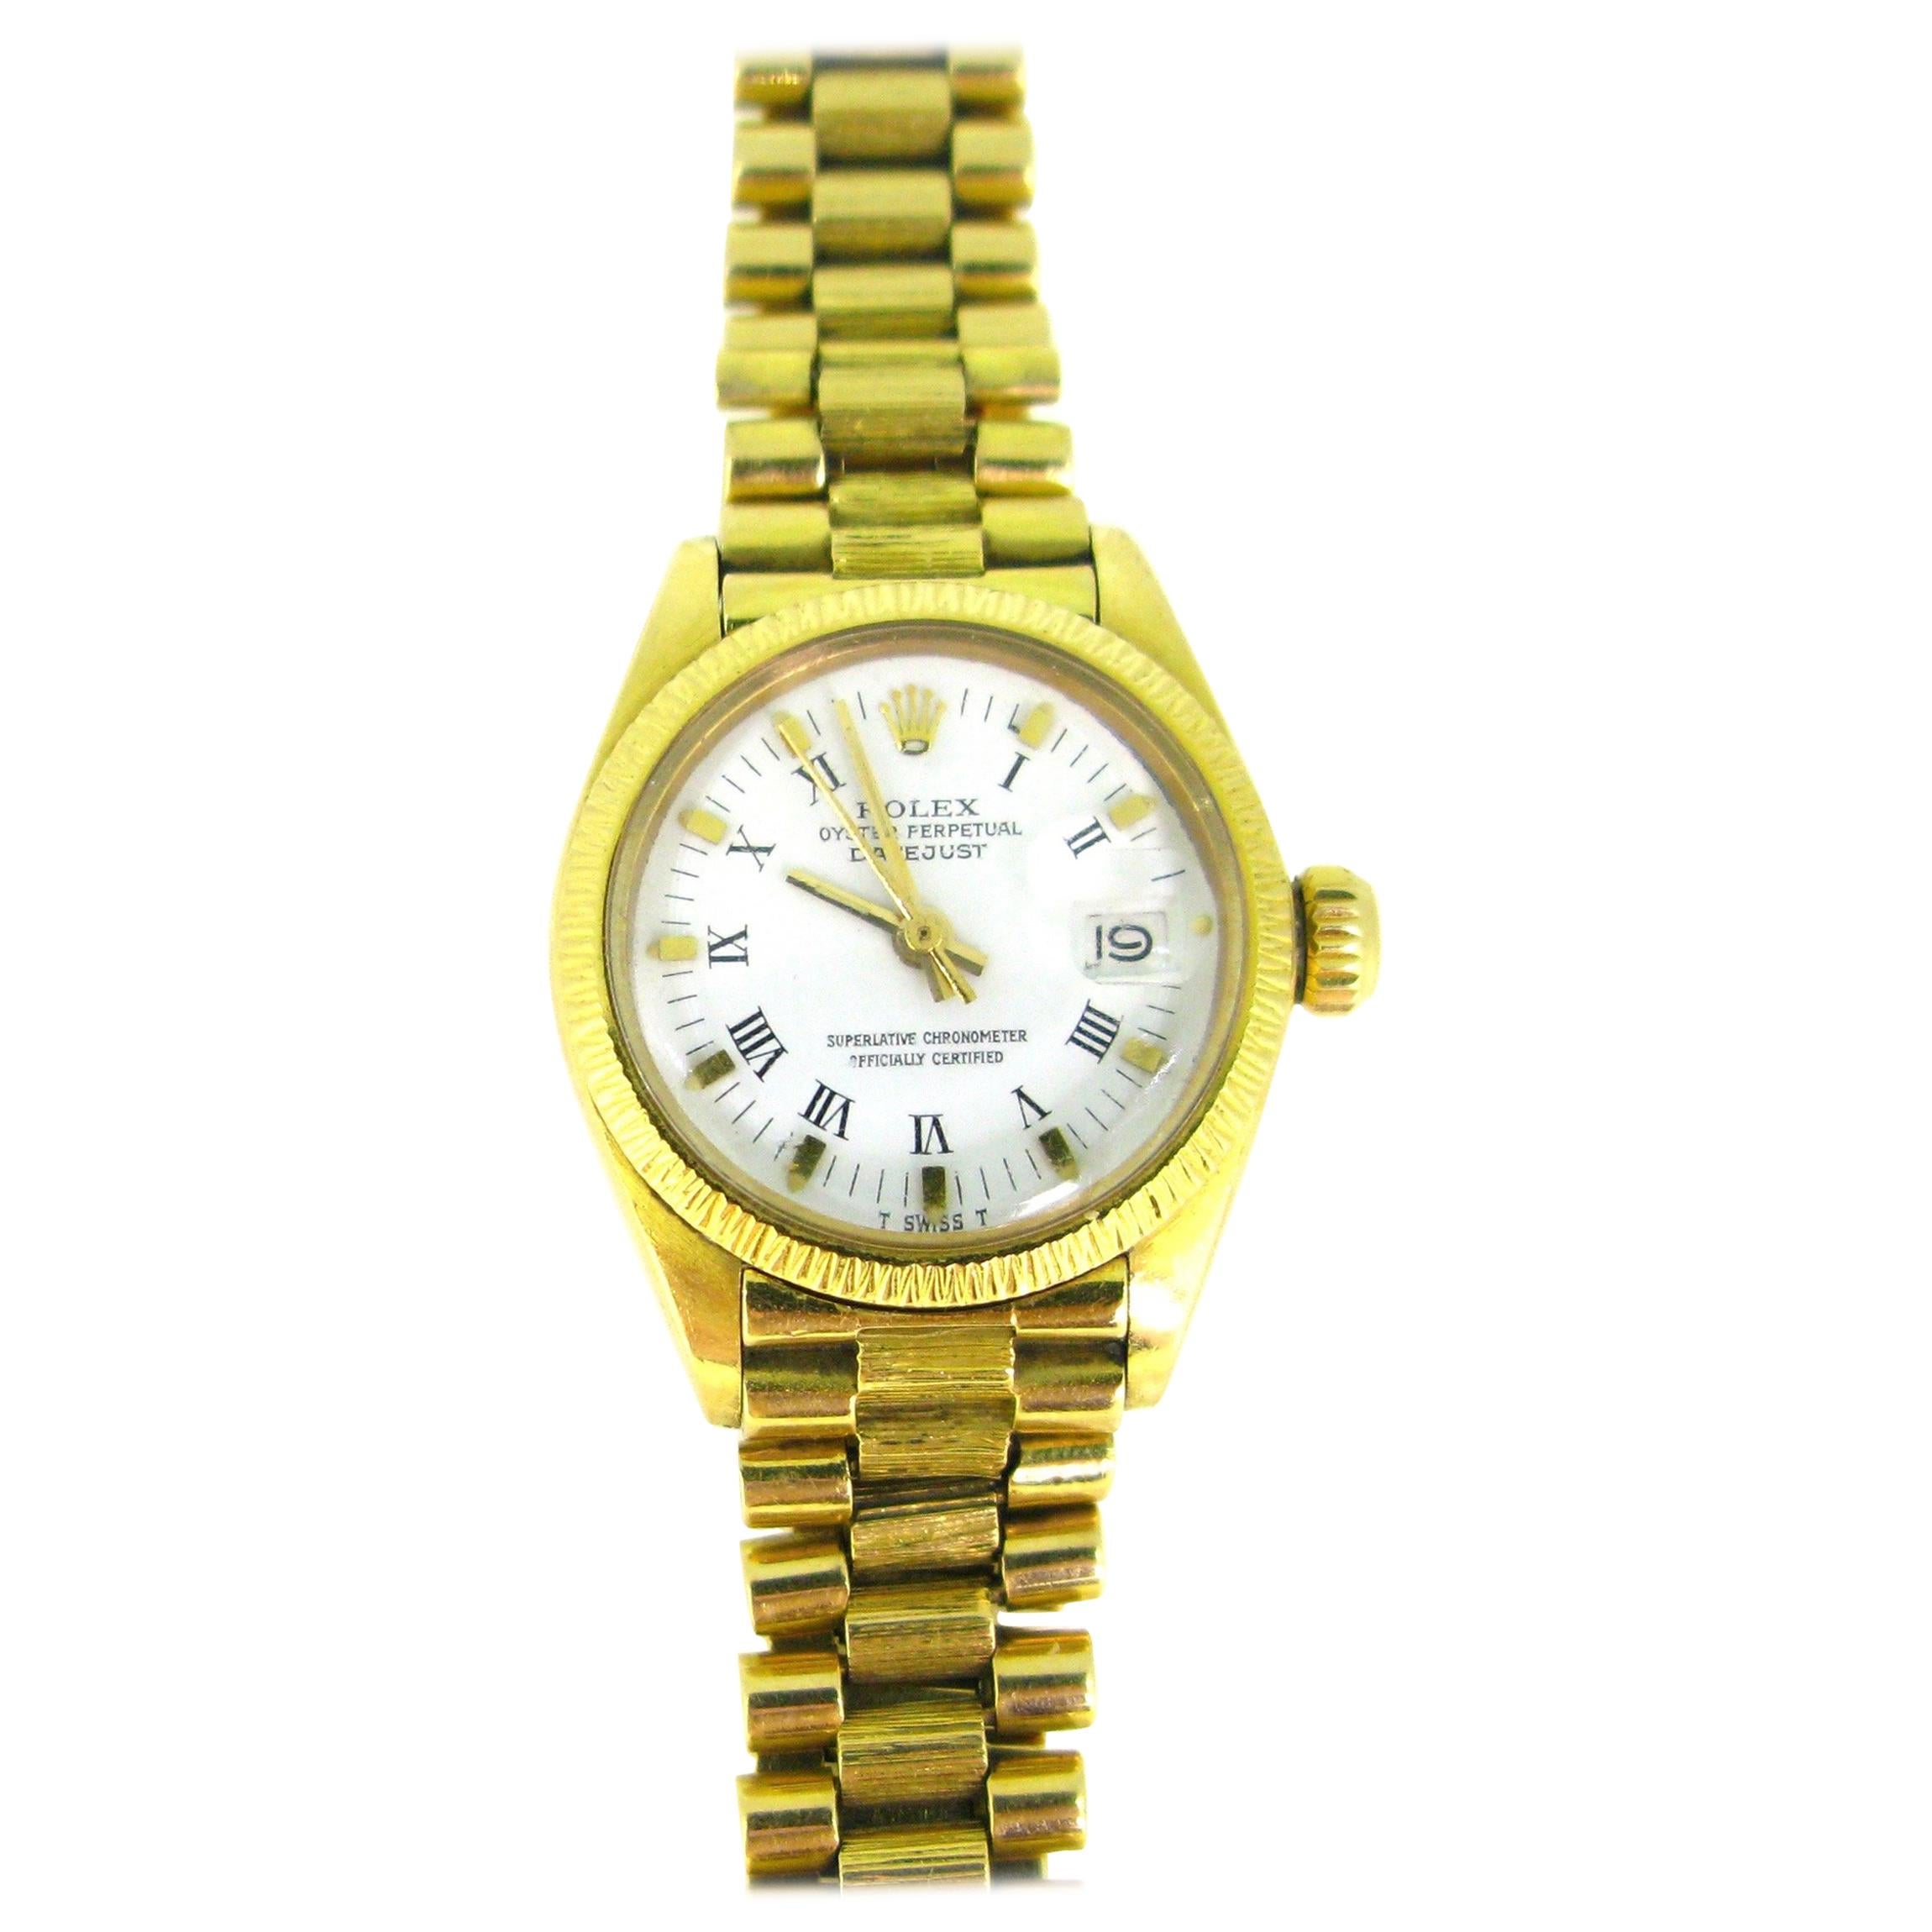 Rolex Oyster Perpetual Datejust 6927 Yellow Gold 1975 Ladies Watch